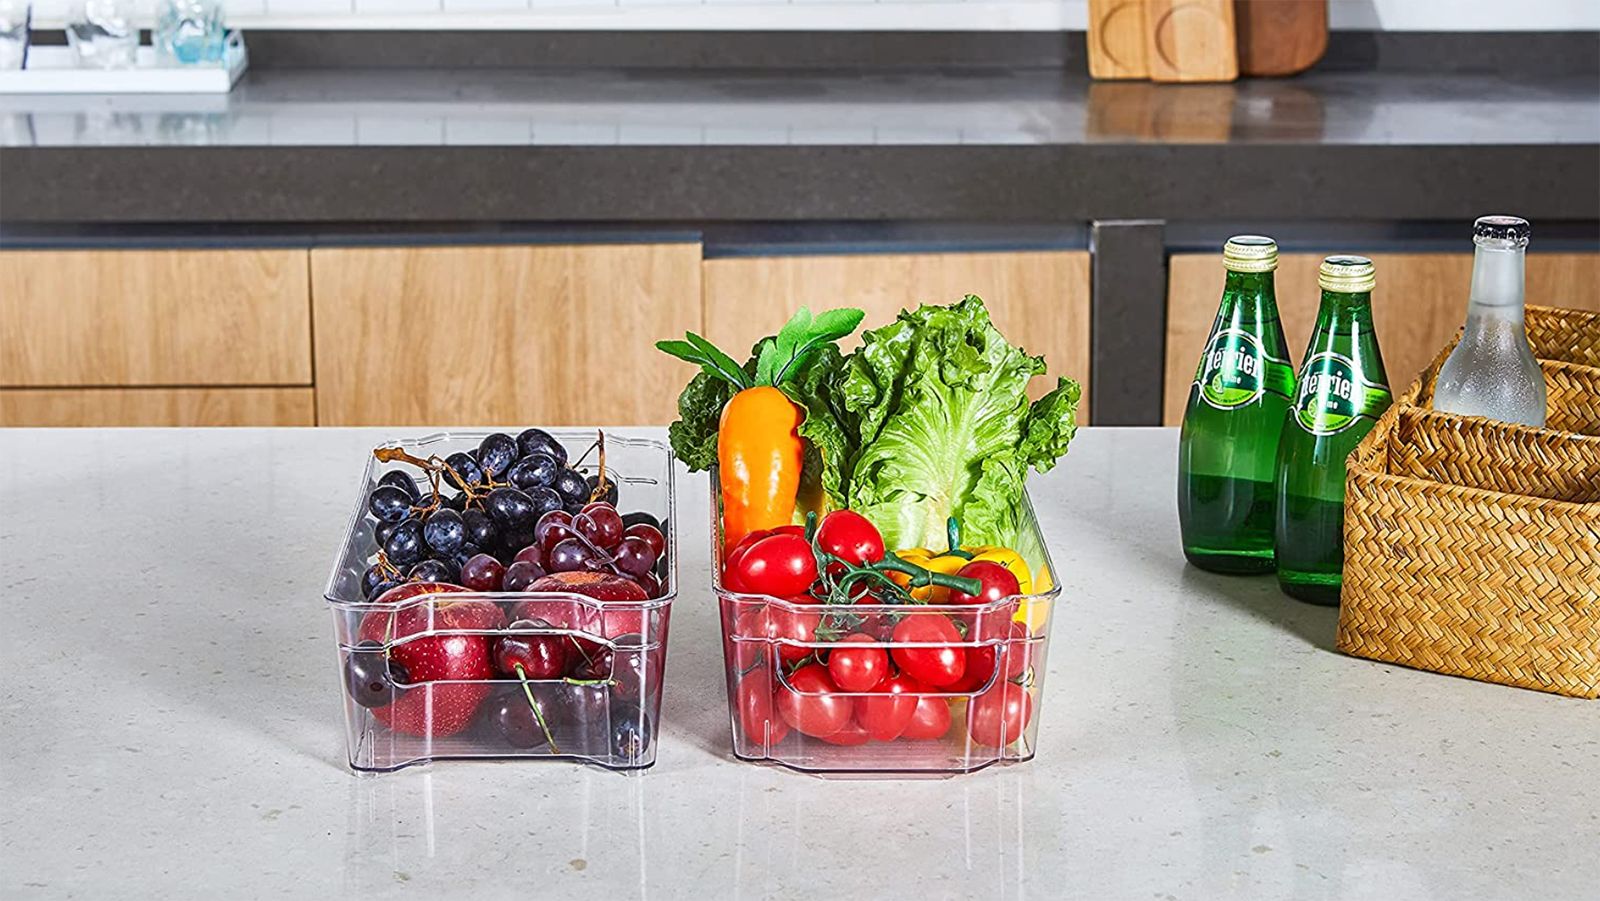 This Innovative Freezer Gadget Is a Meal Prep and Organizational